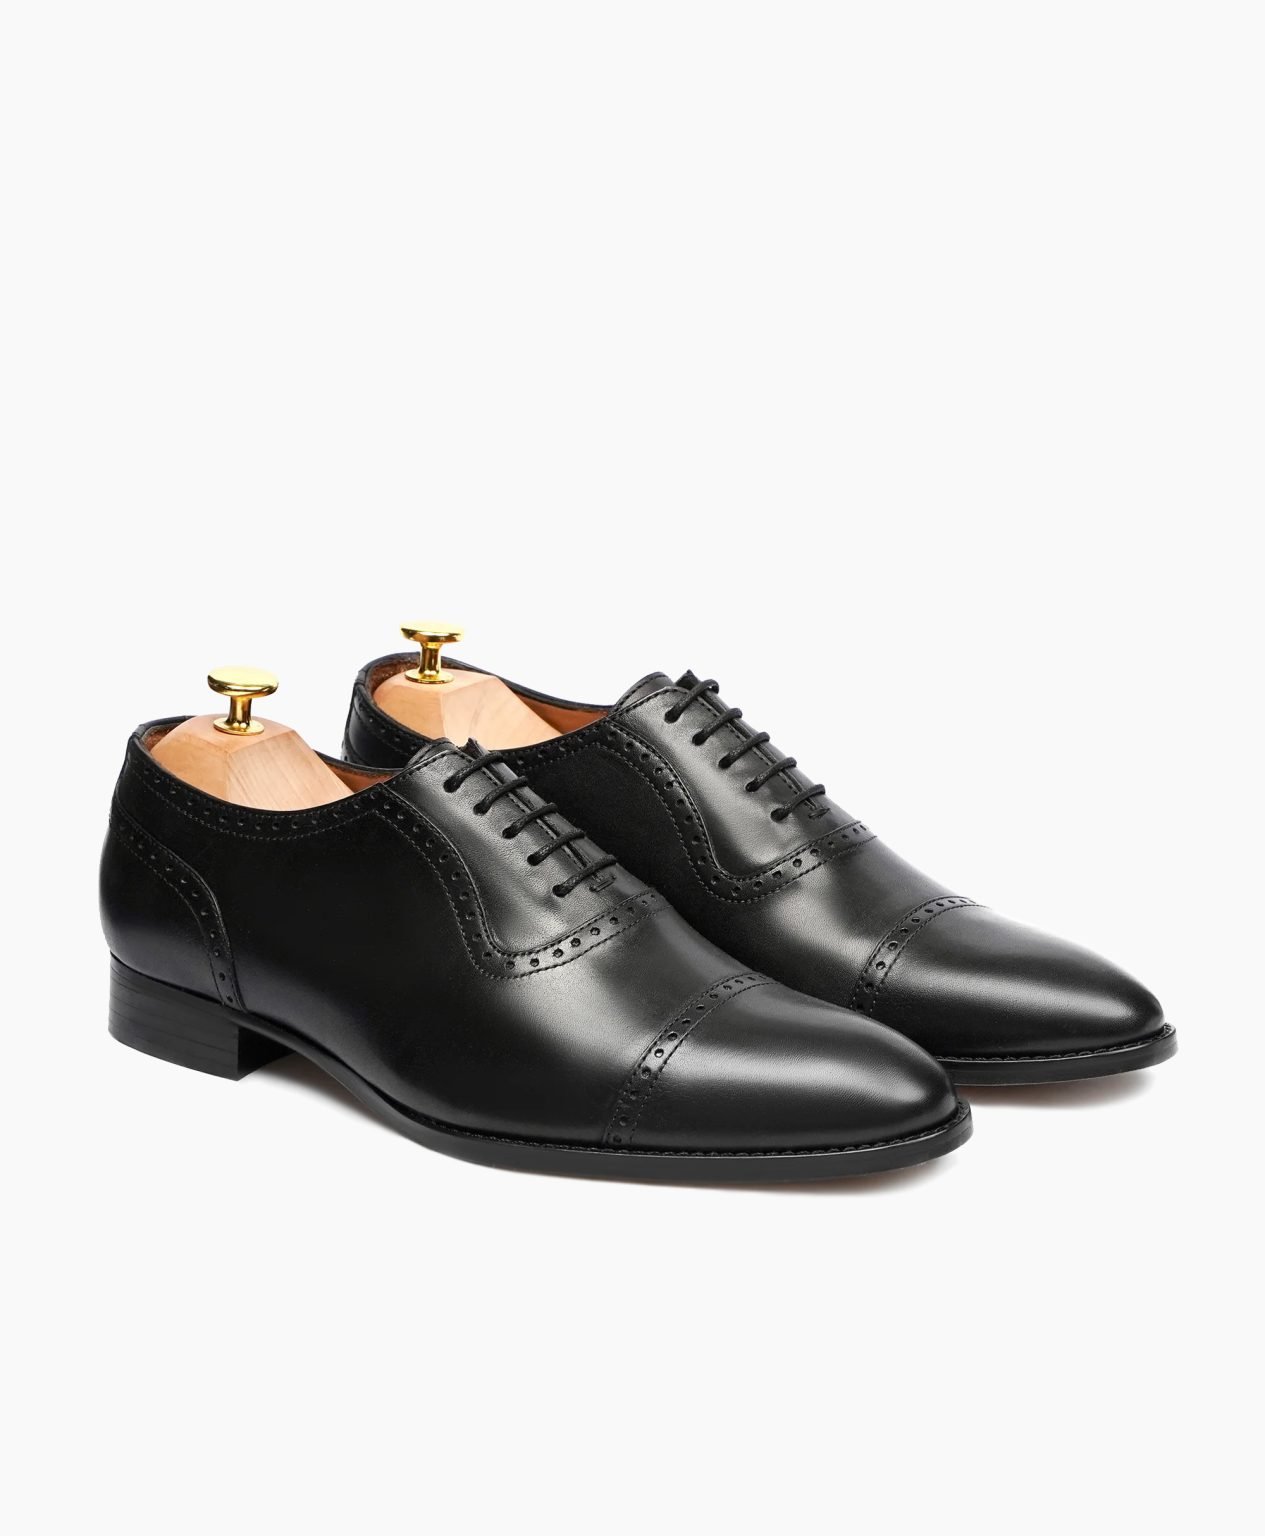 bodmin-oxford-black-leather-shoes-image200